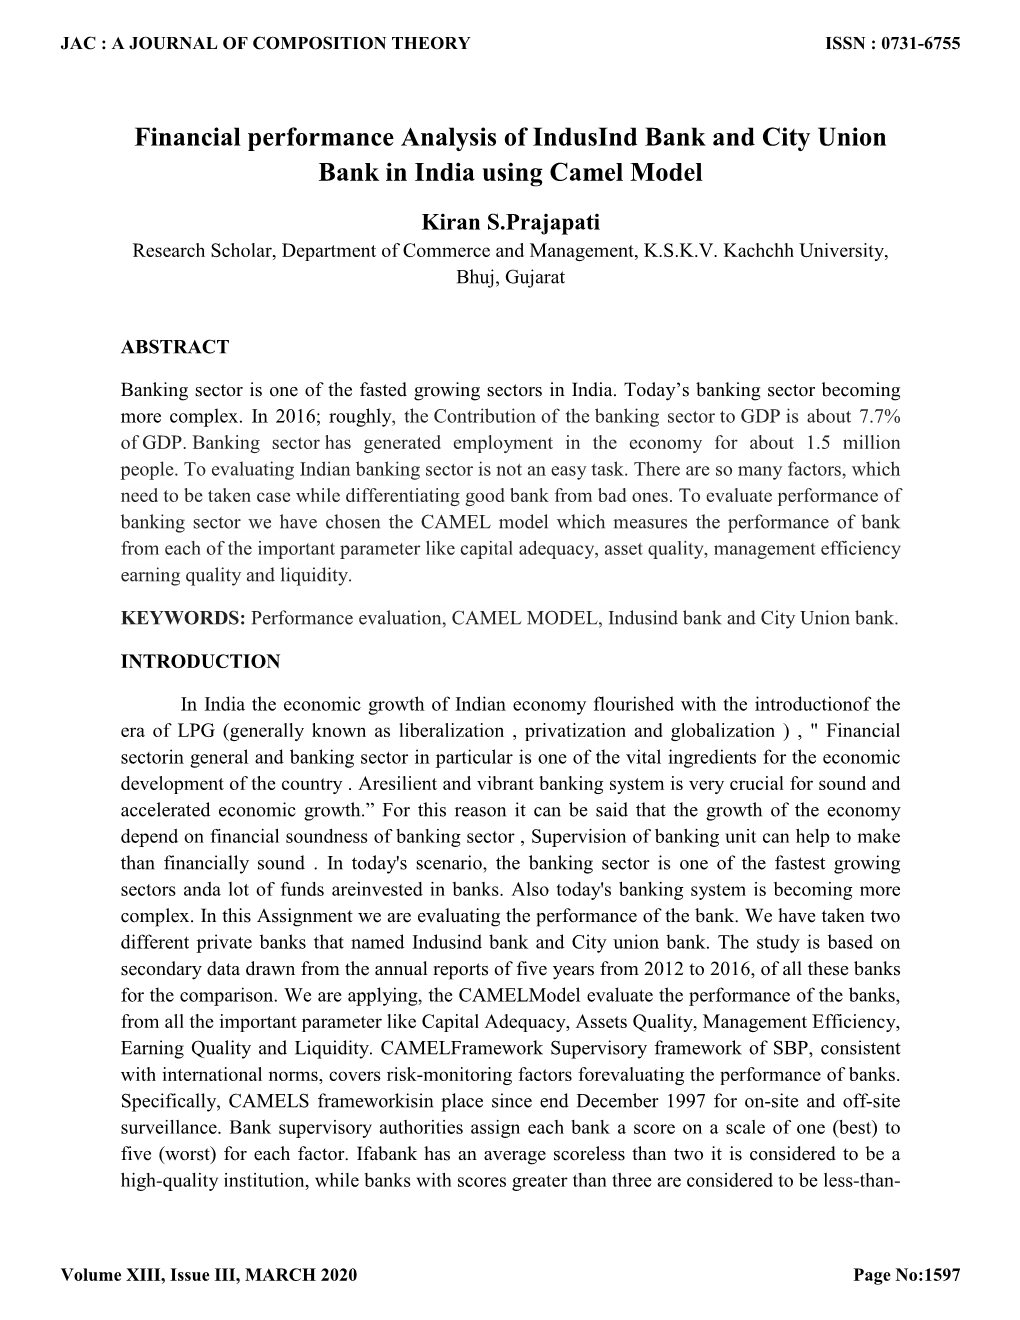 Financial Performance Analysis of Indusind Bank and City Union Bank in India Using Camel Model